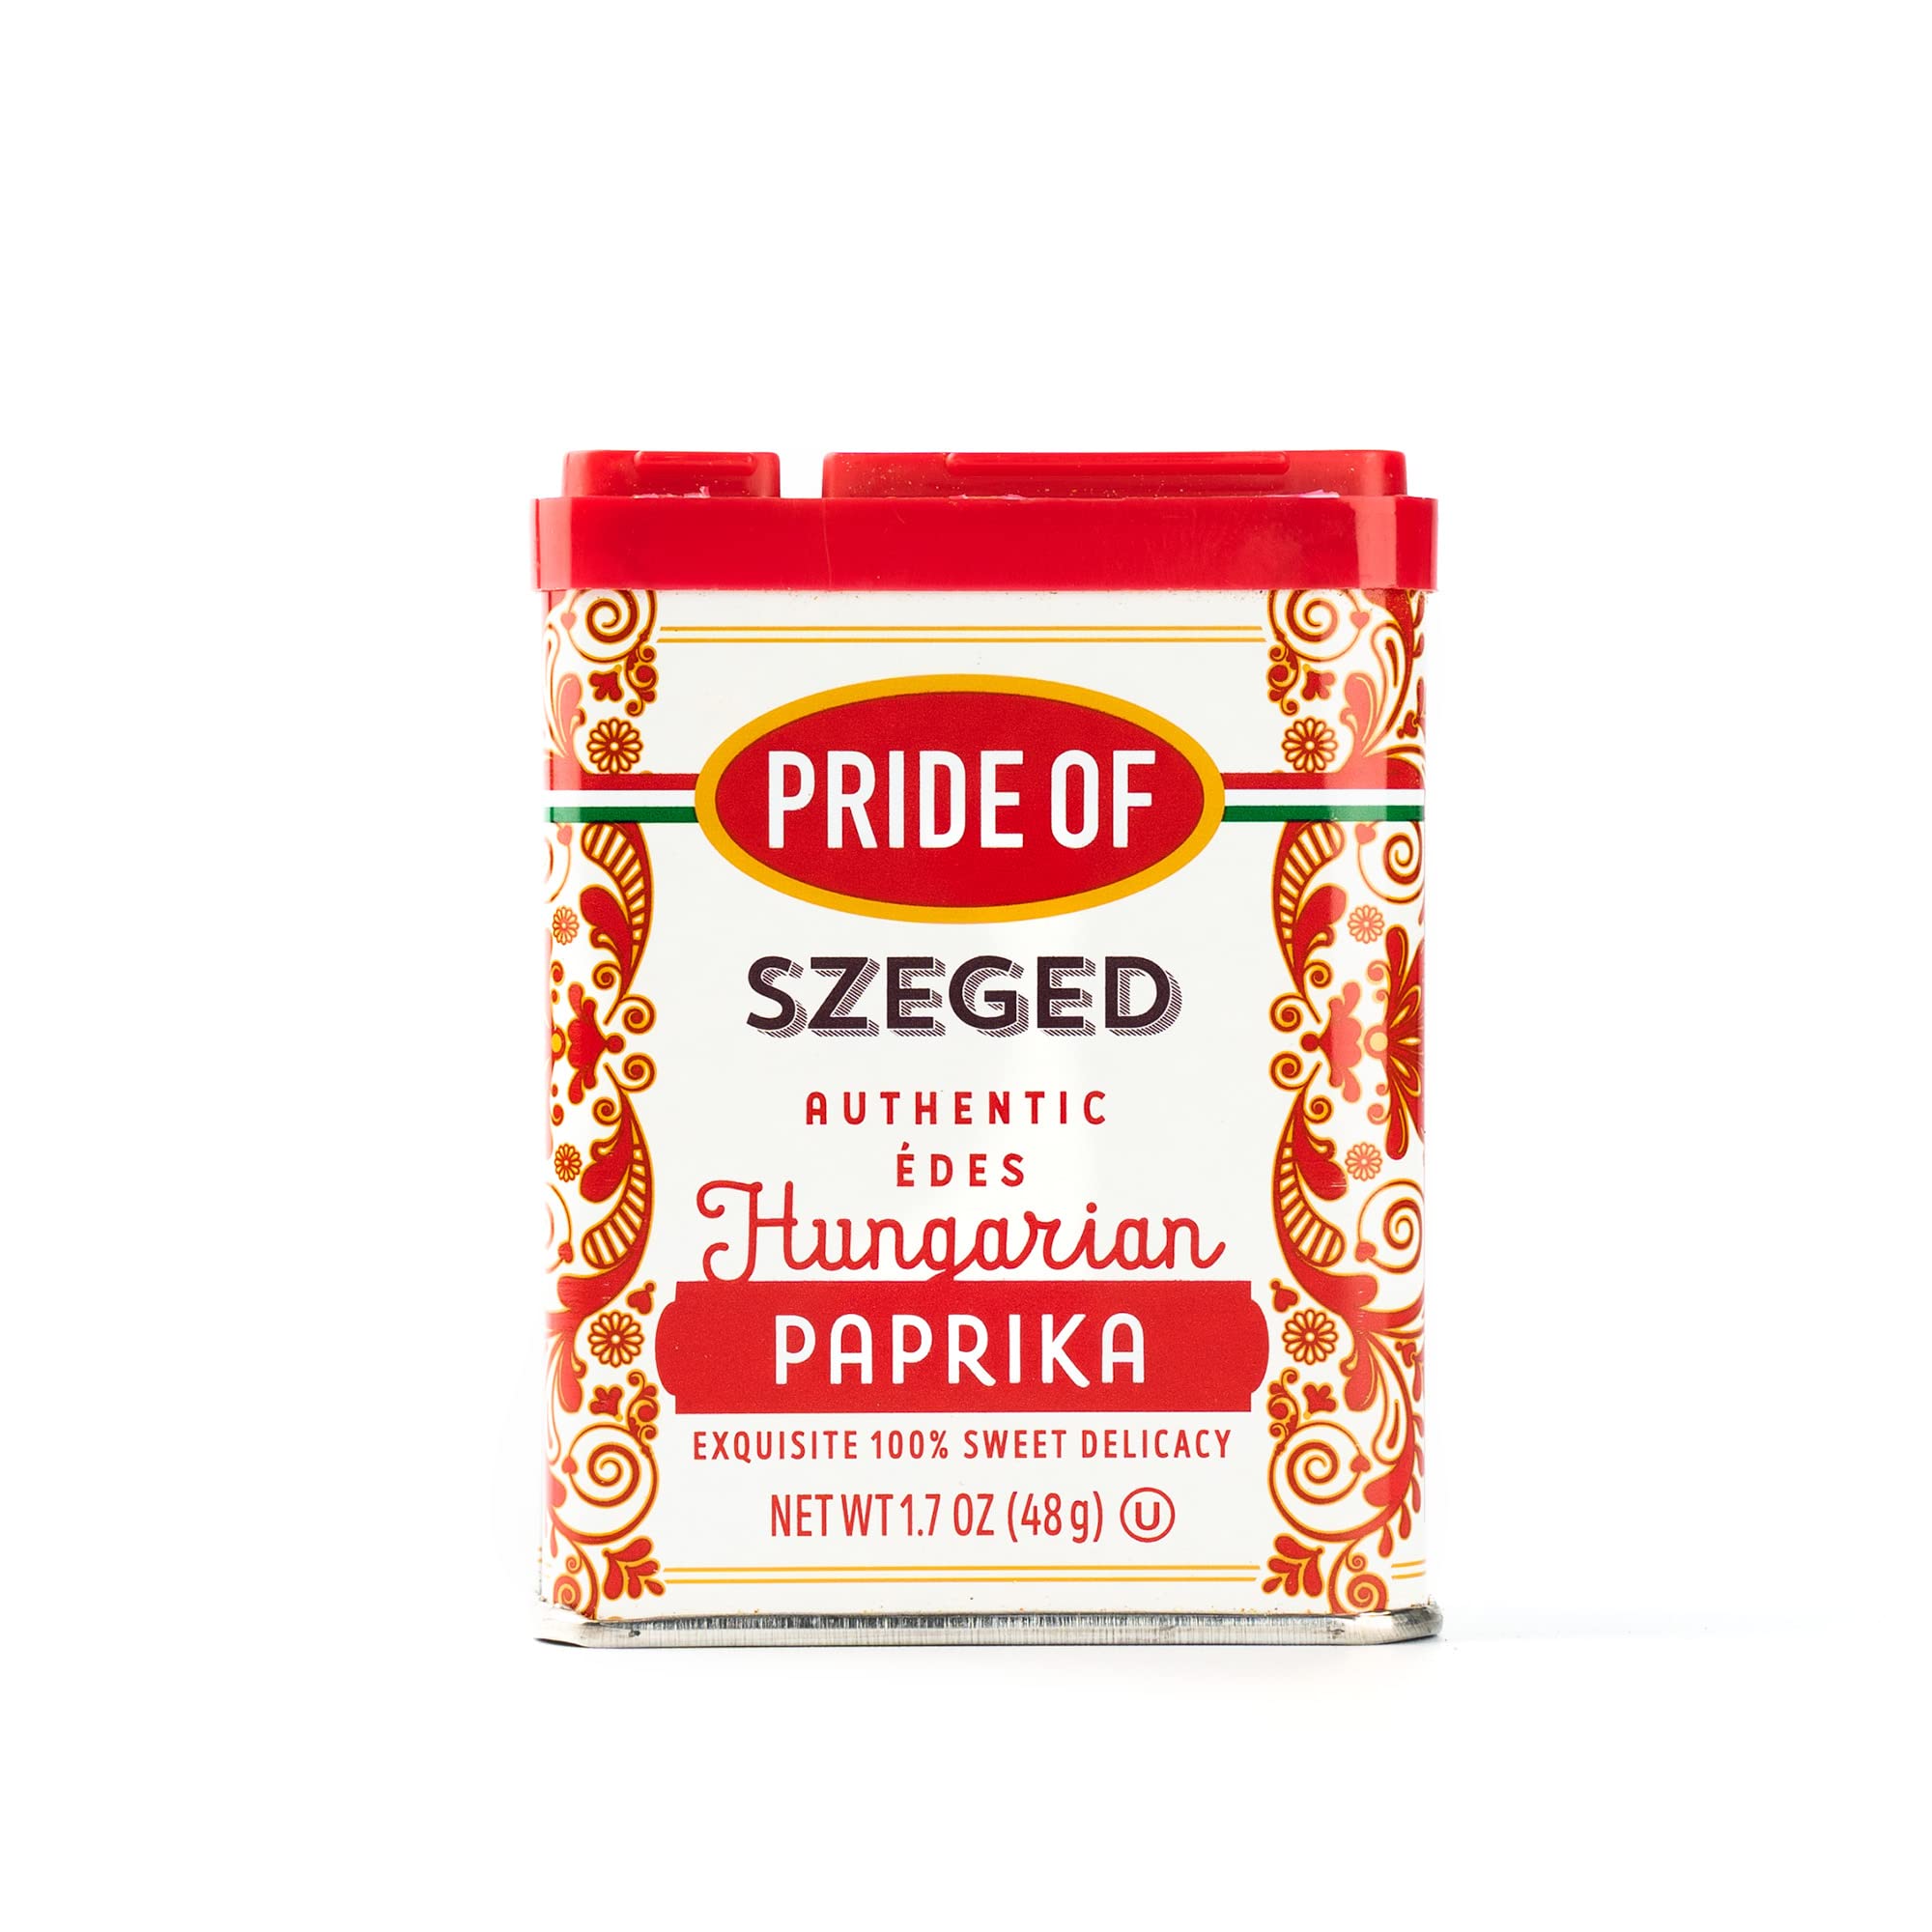 Pride Of Szeged Hungarian Sweet Paprika, Authentic Hungarian Sourced, Single Ingredient Premium Spice | Gluten Free | Kosher | Non-GMO | 1.7 oz. Tin, 1-Count